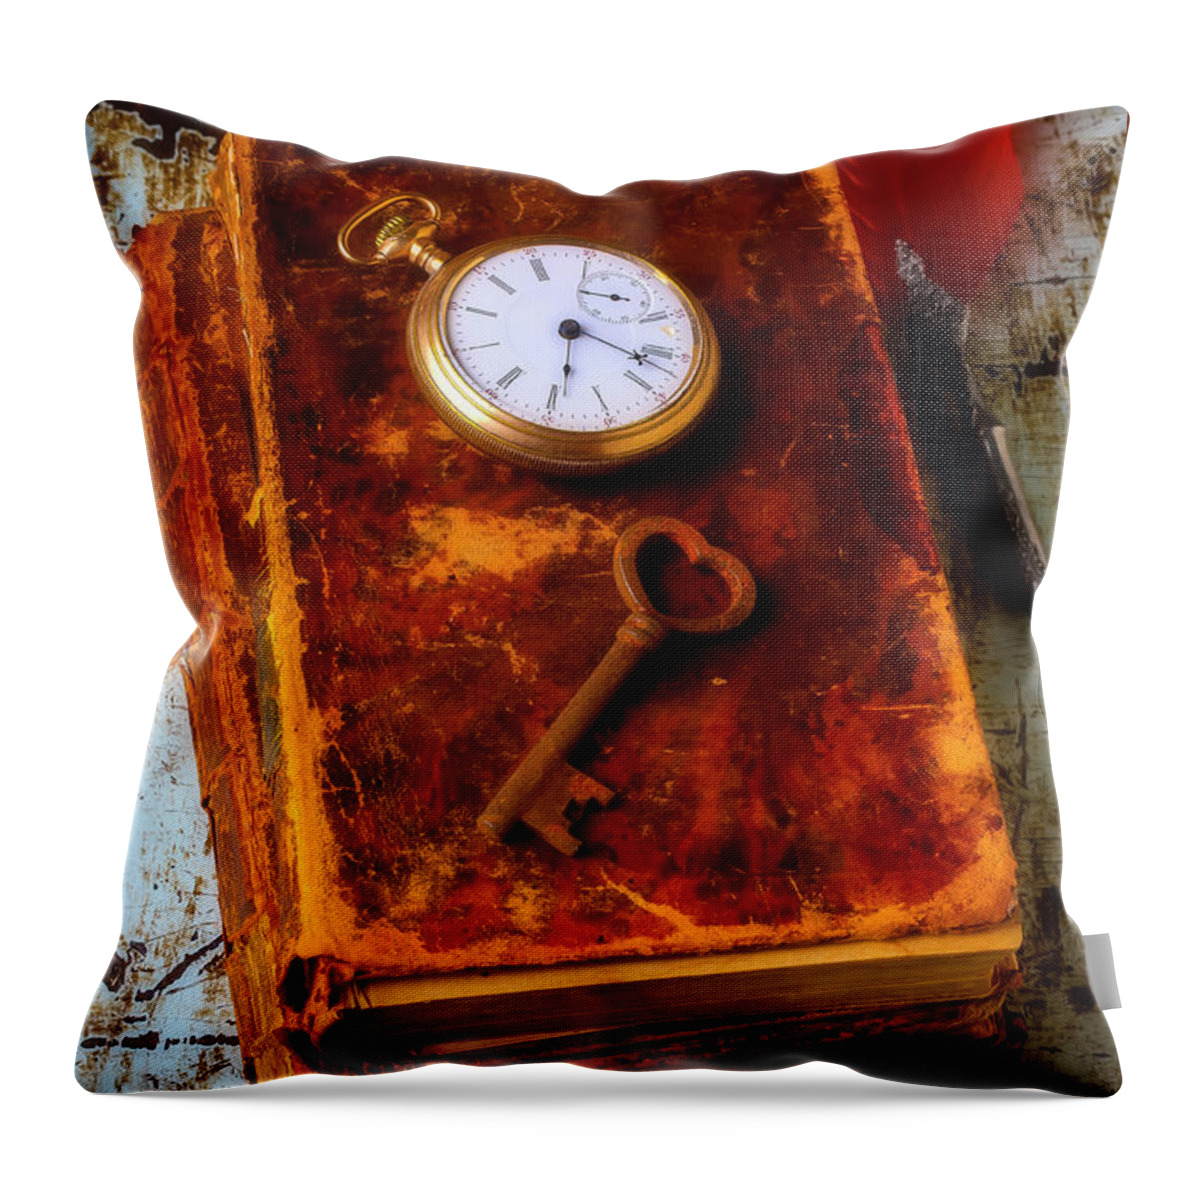 Key Throw Pillow featuring the photograph Old Books With Key And Pocketwatch by Garry Gay